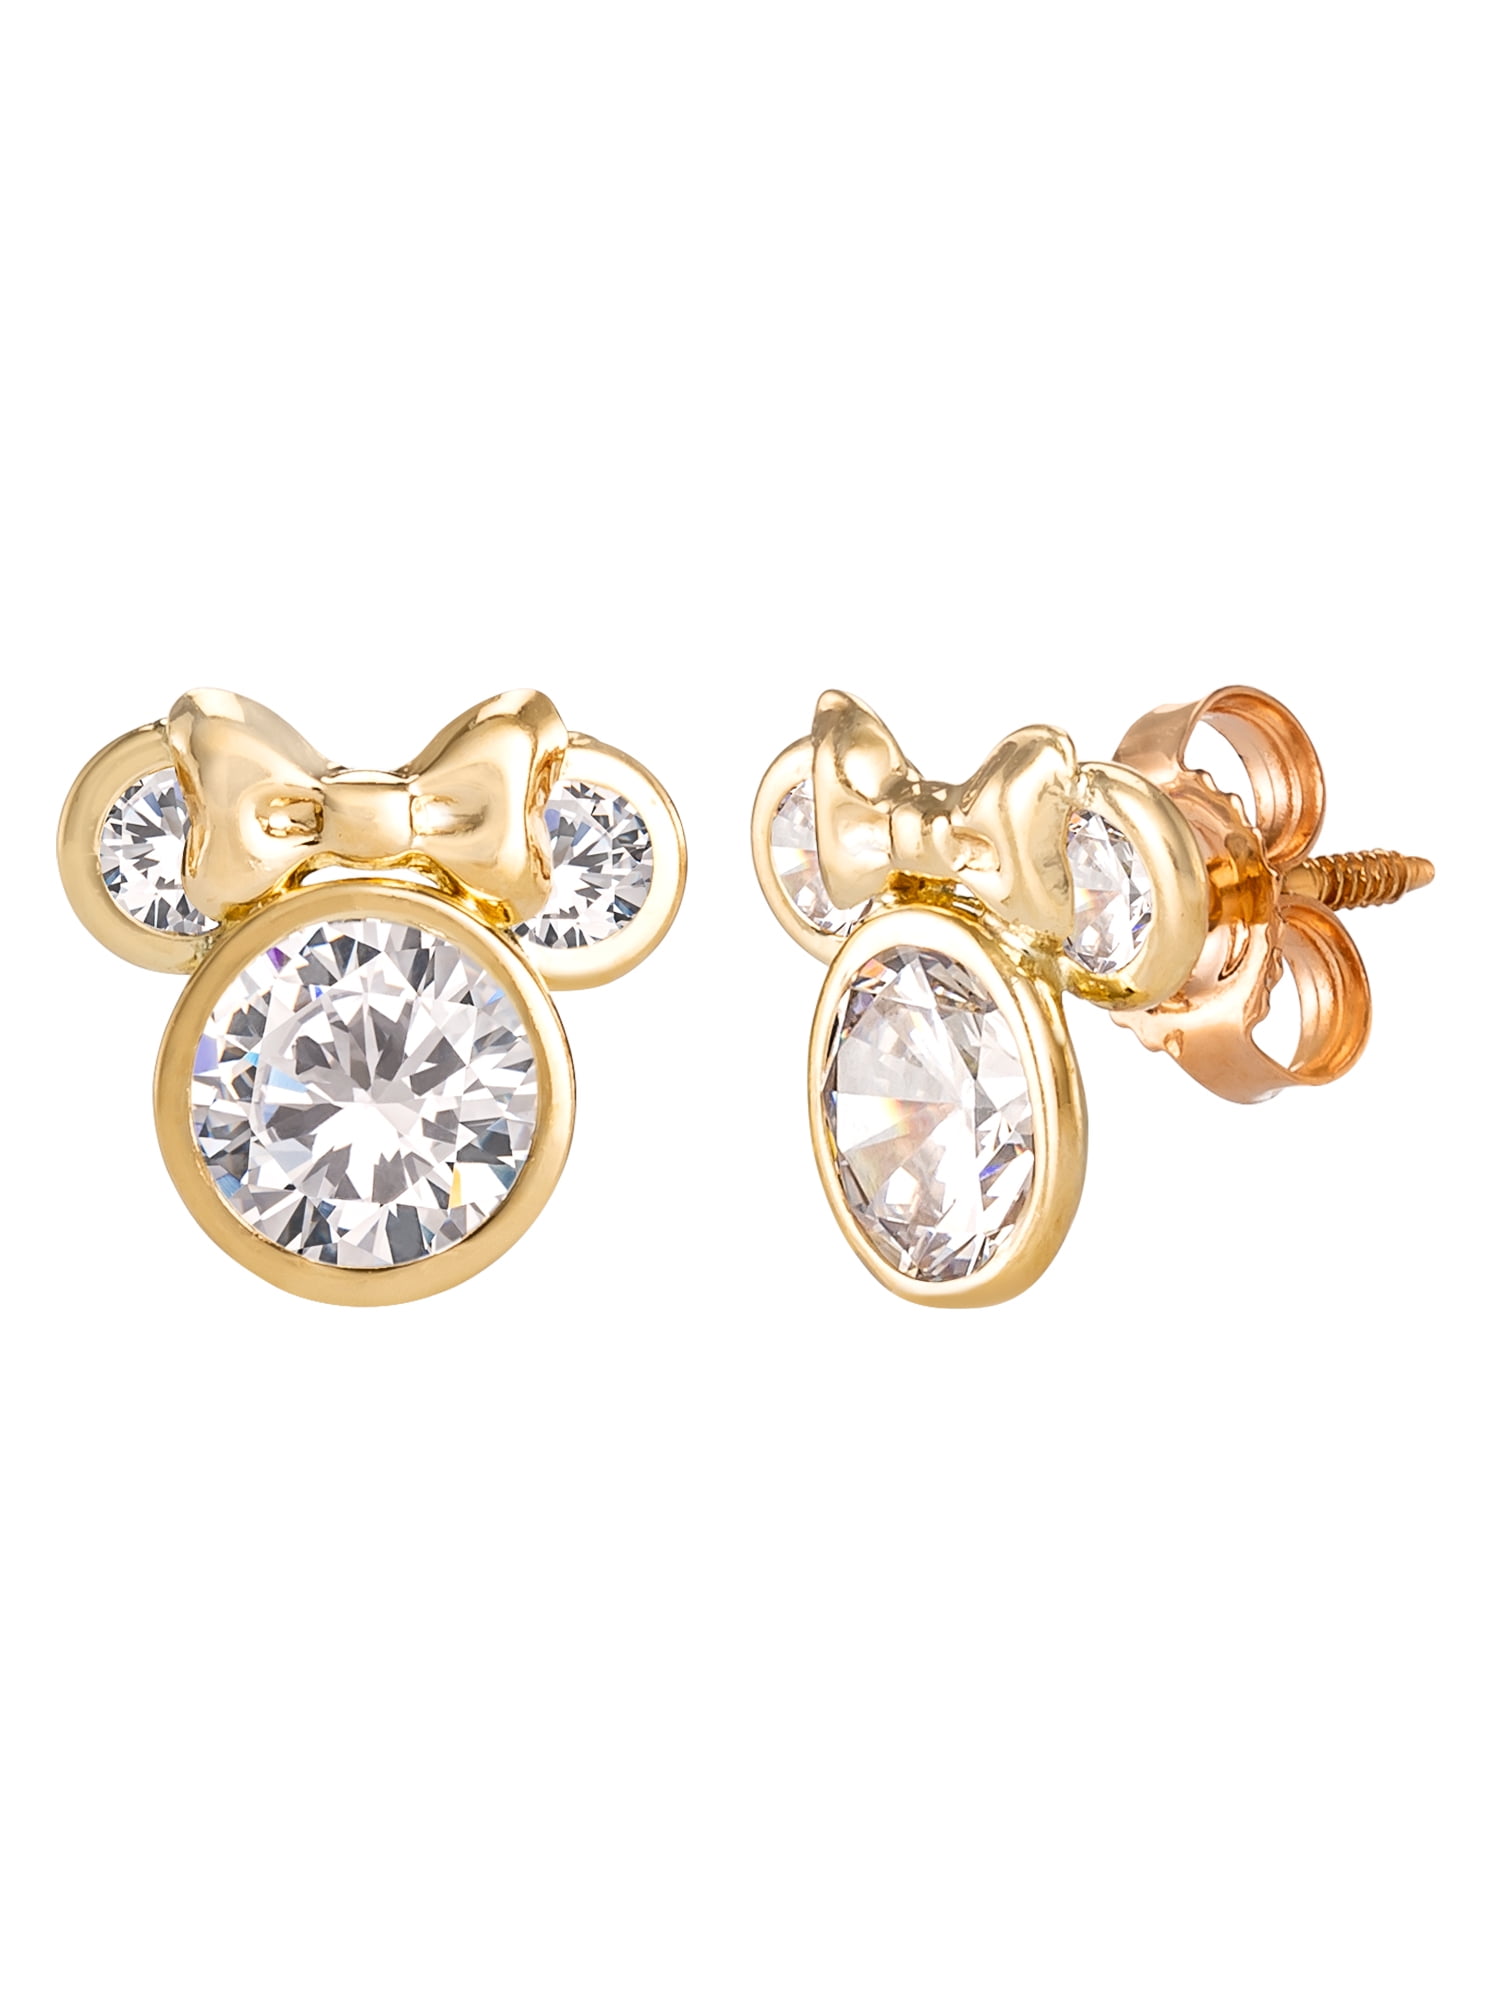 10KT Yellow Gold Minnie Mouse Earrings